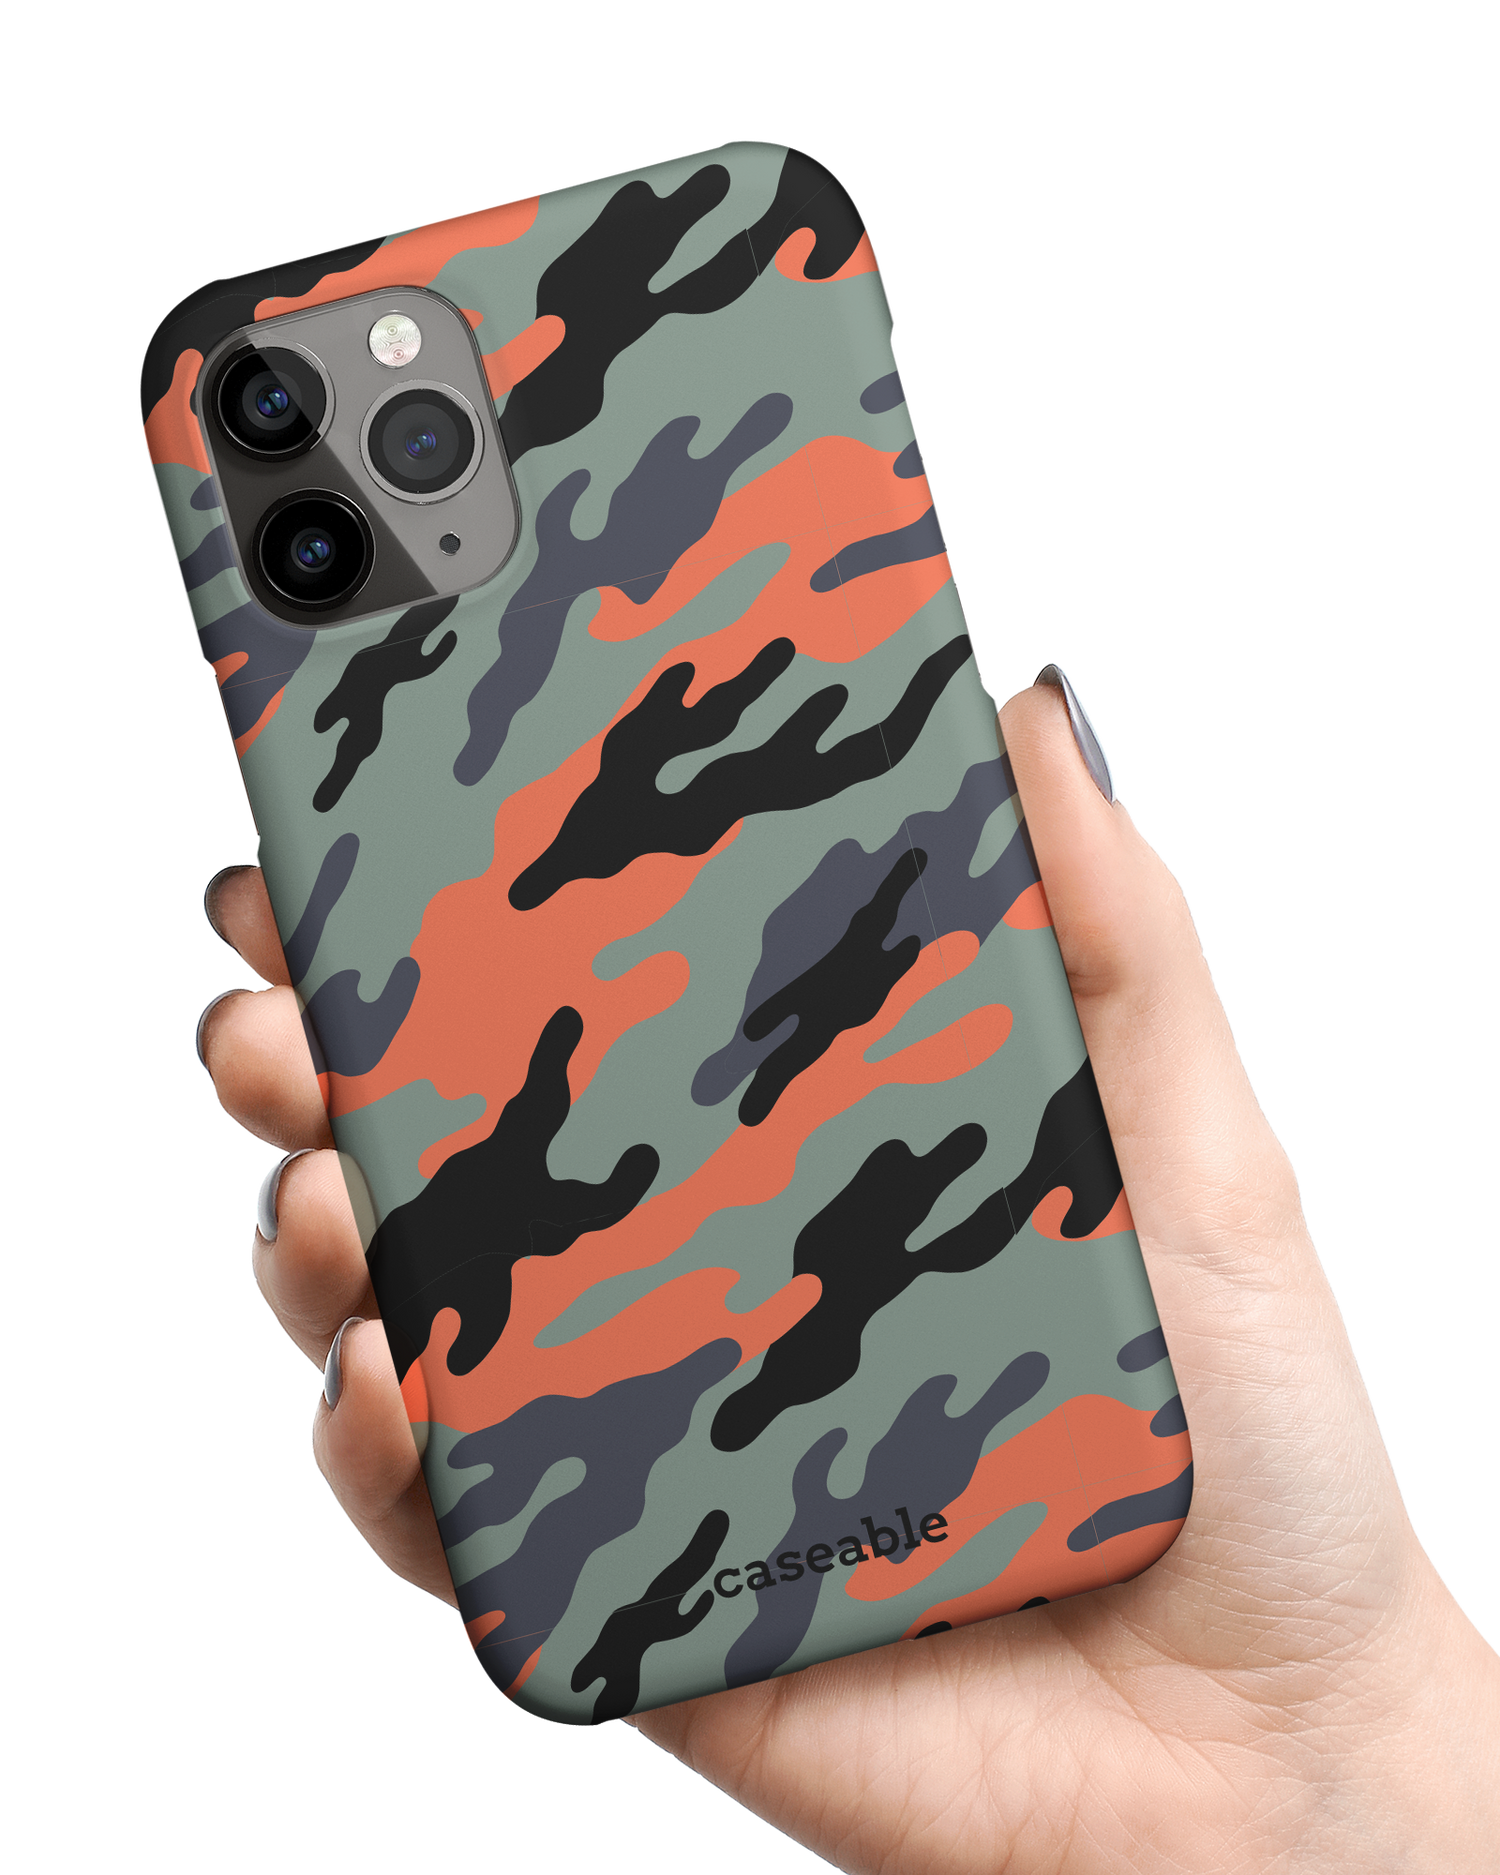 Camo Sunset Hard Shell Phone Case Apple iPhone 11 Pro Max held in hand